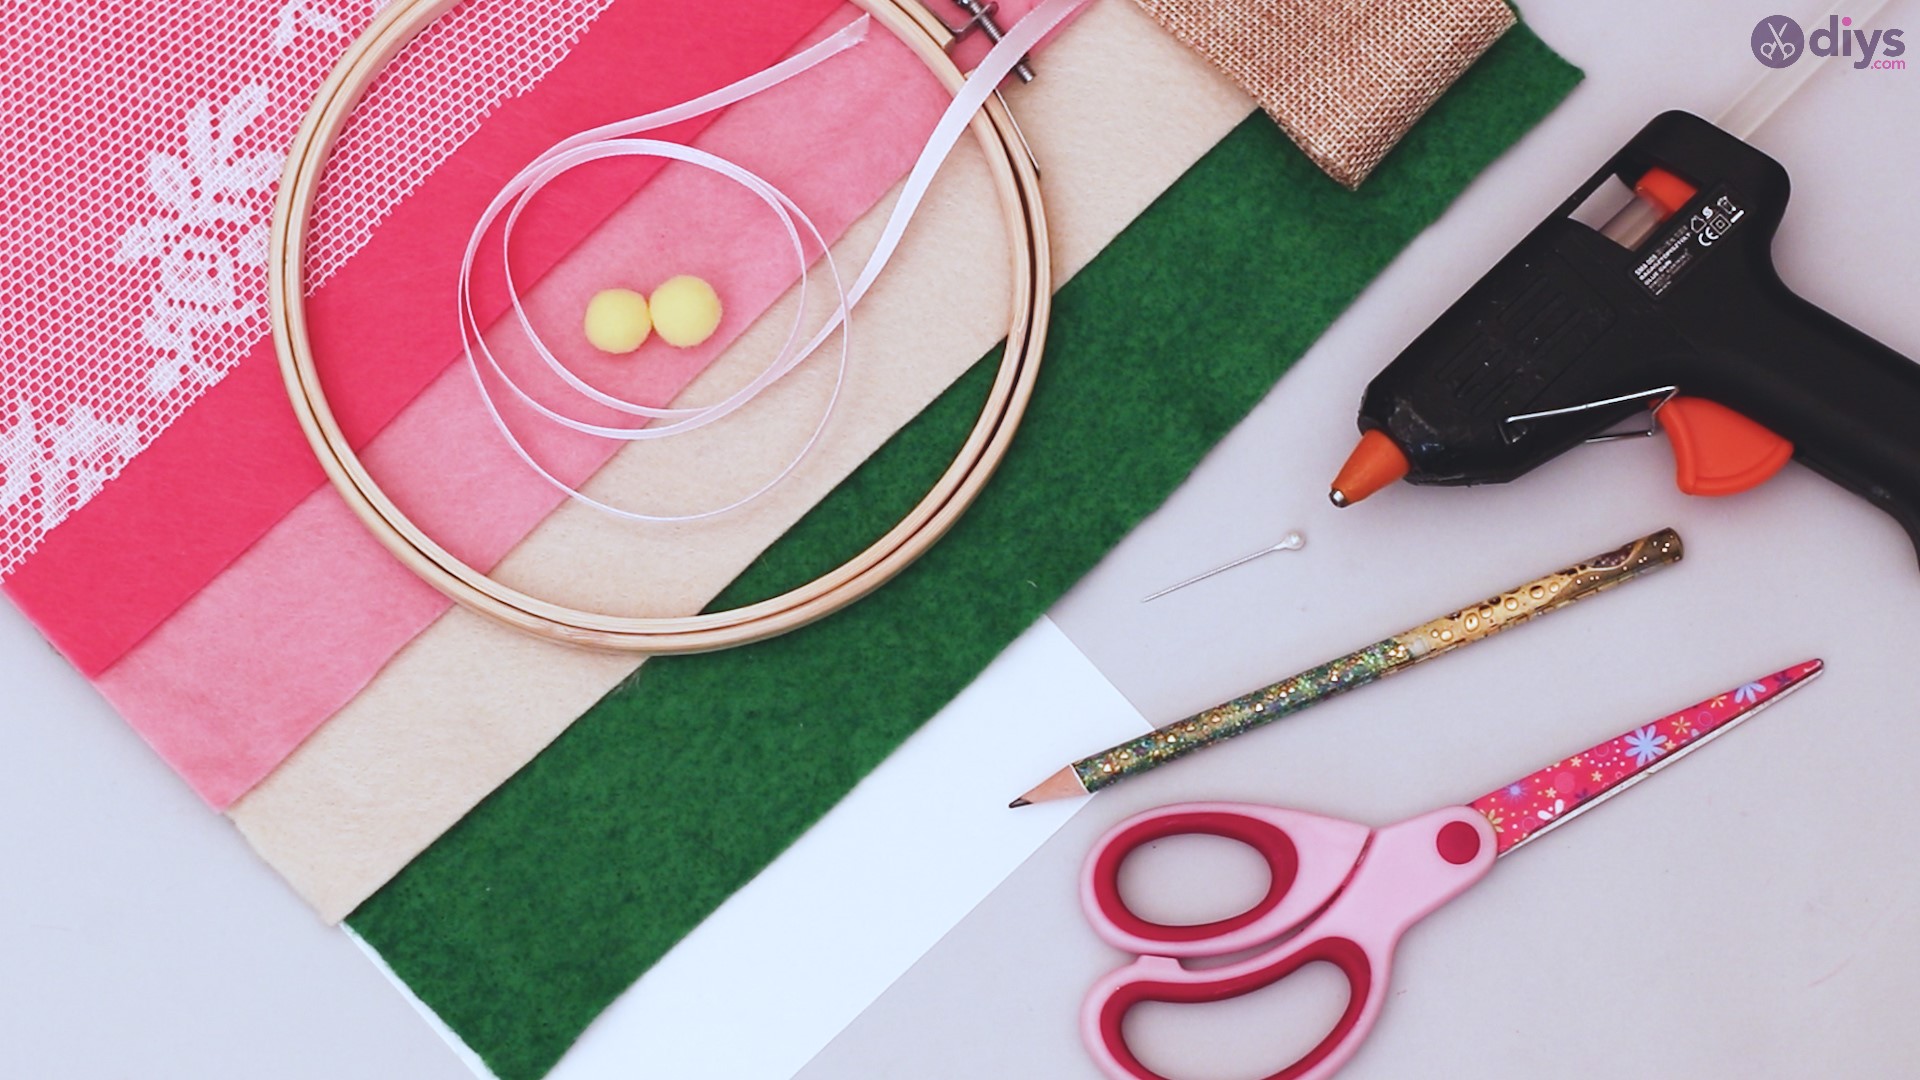 Diy embroidery hoop wall decor tutorial step by step materials